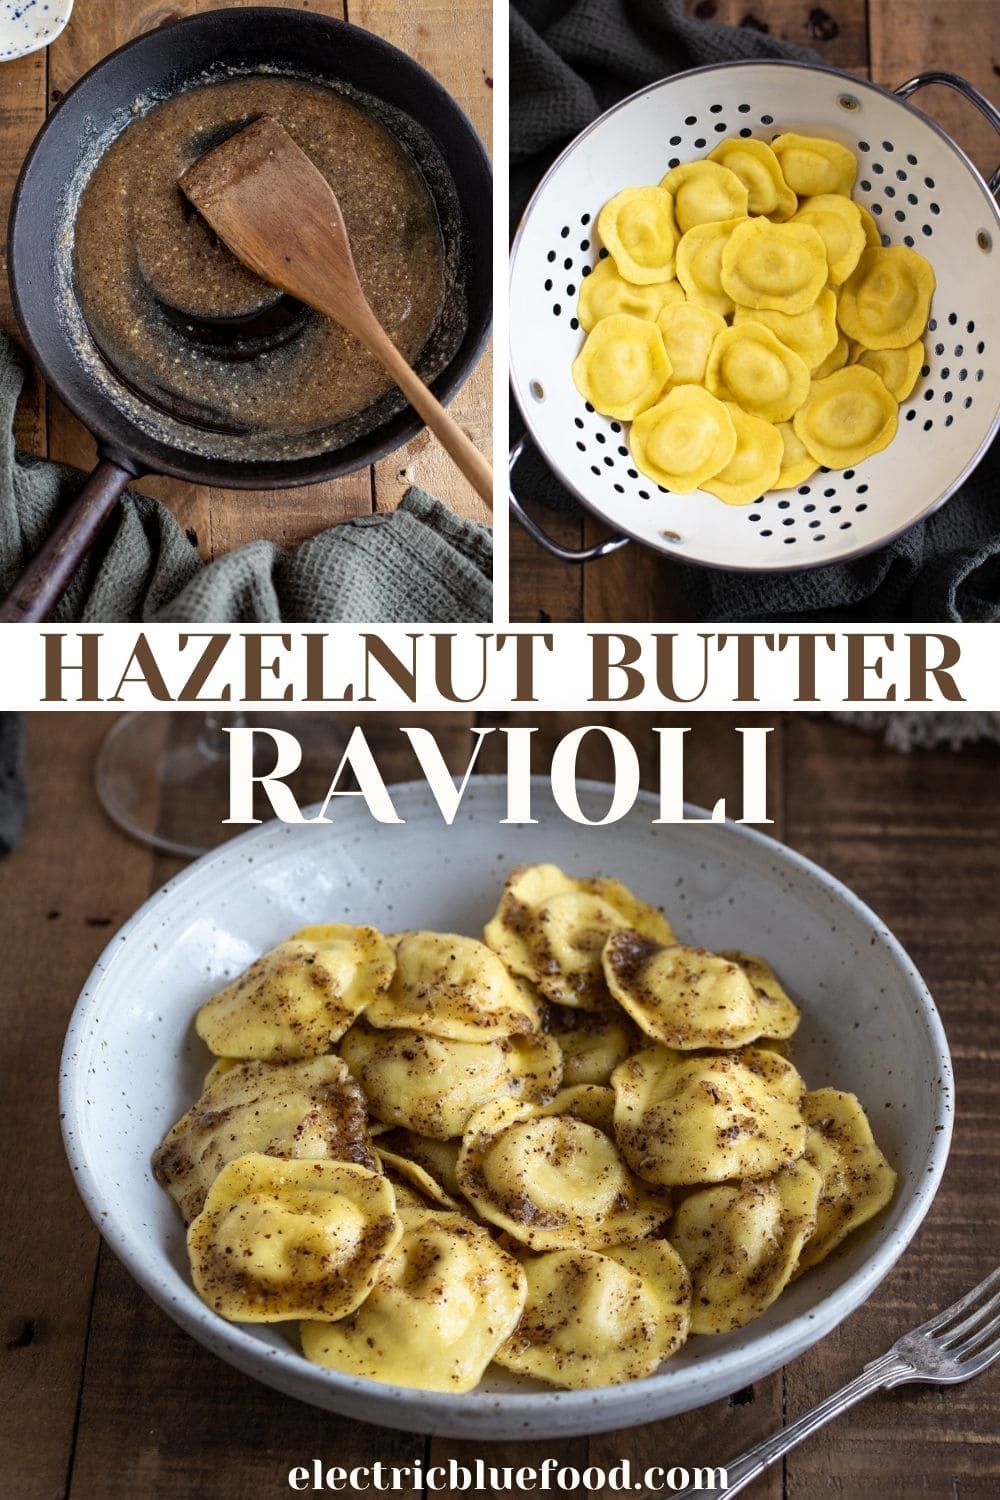 Cheese ravioli sautéed in hazelnut butter sauce. A simple recipe to prepare a delicious ravioli dish with a sauce that only requires 2 ingredients.